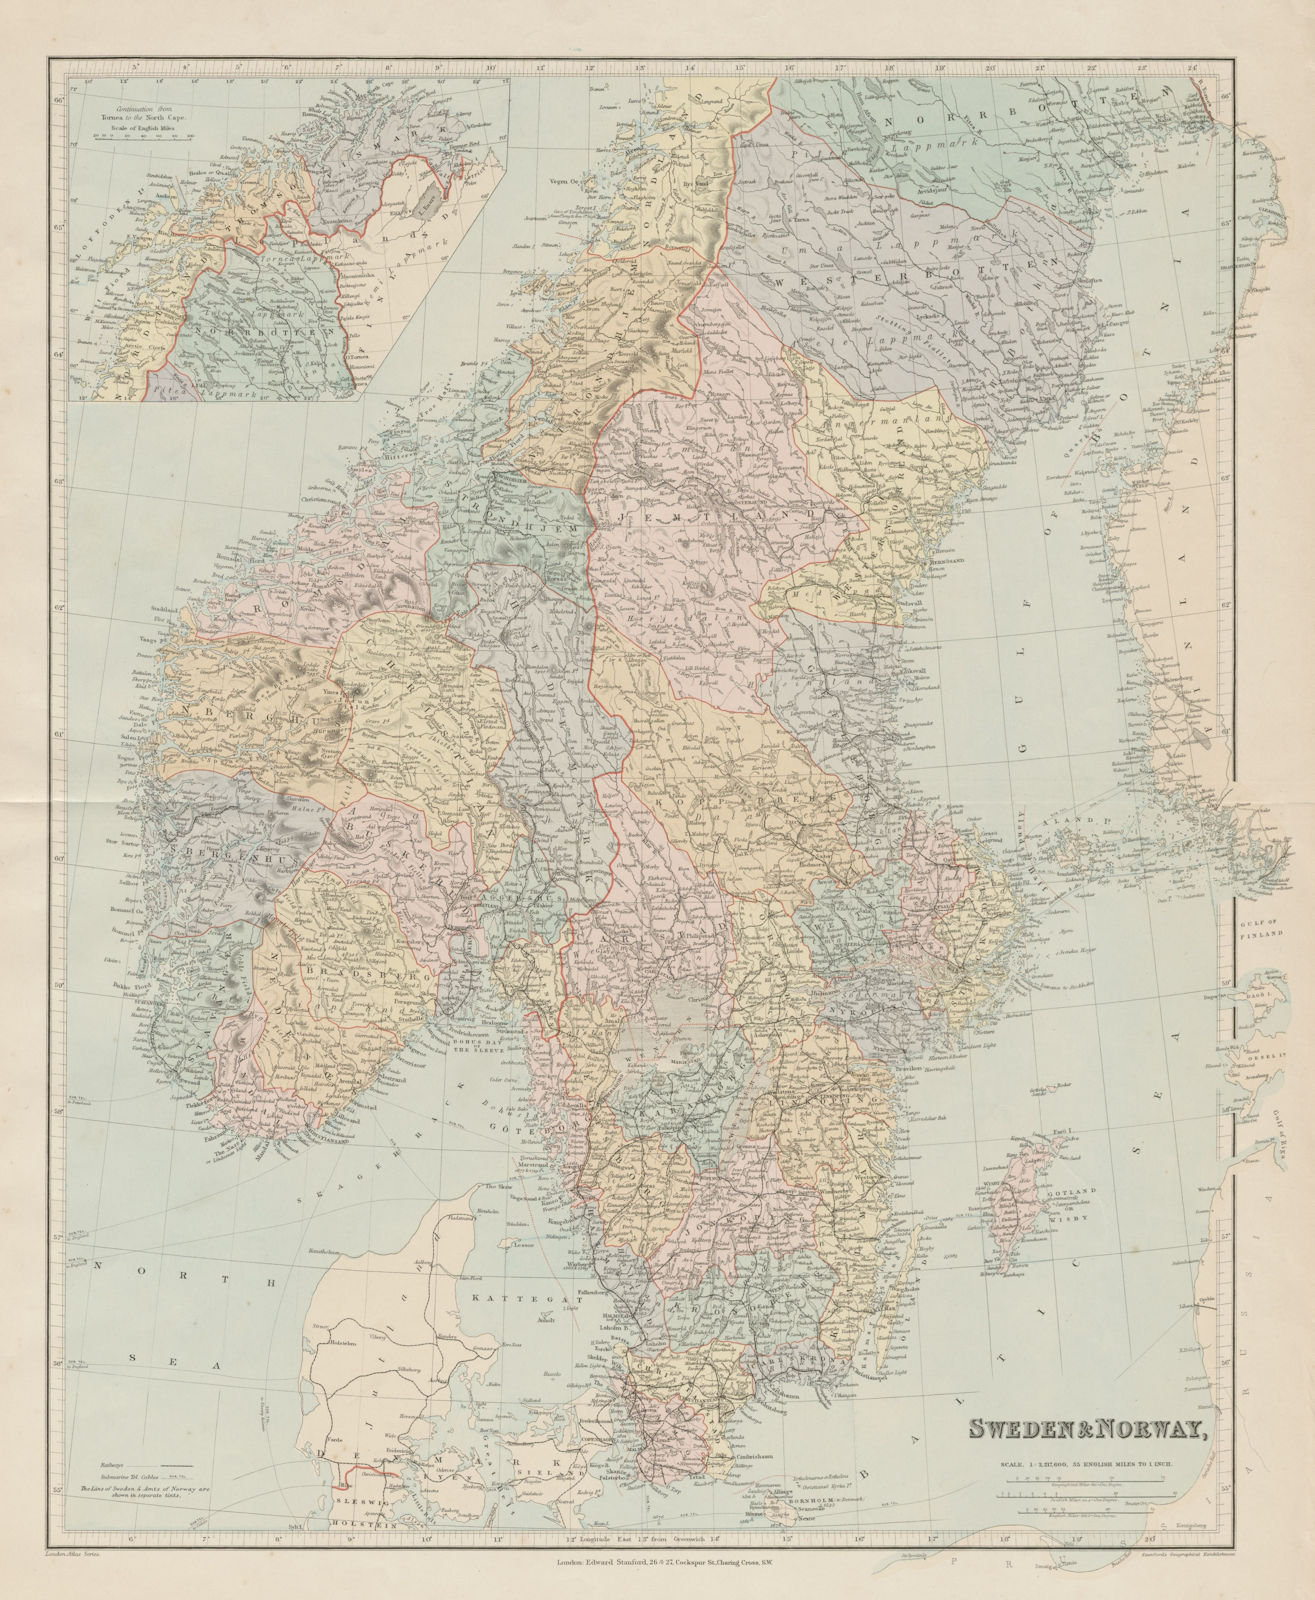 Associate Product Scandinavia political divisions. Sweden Lims. Norway Amts. STANFORD 1894 map